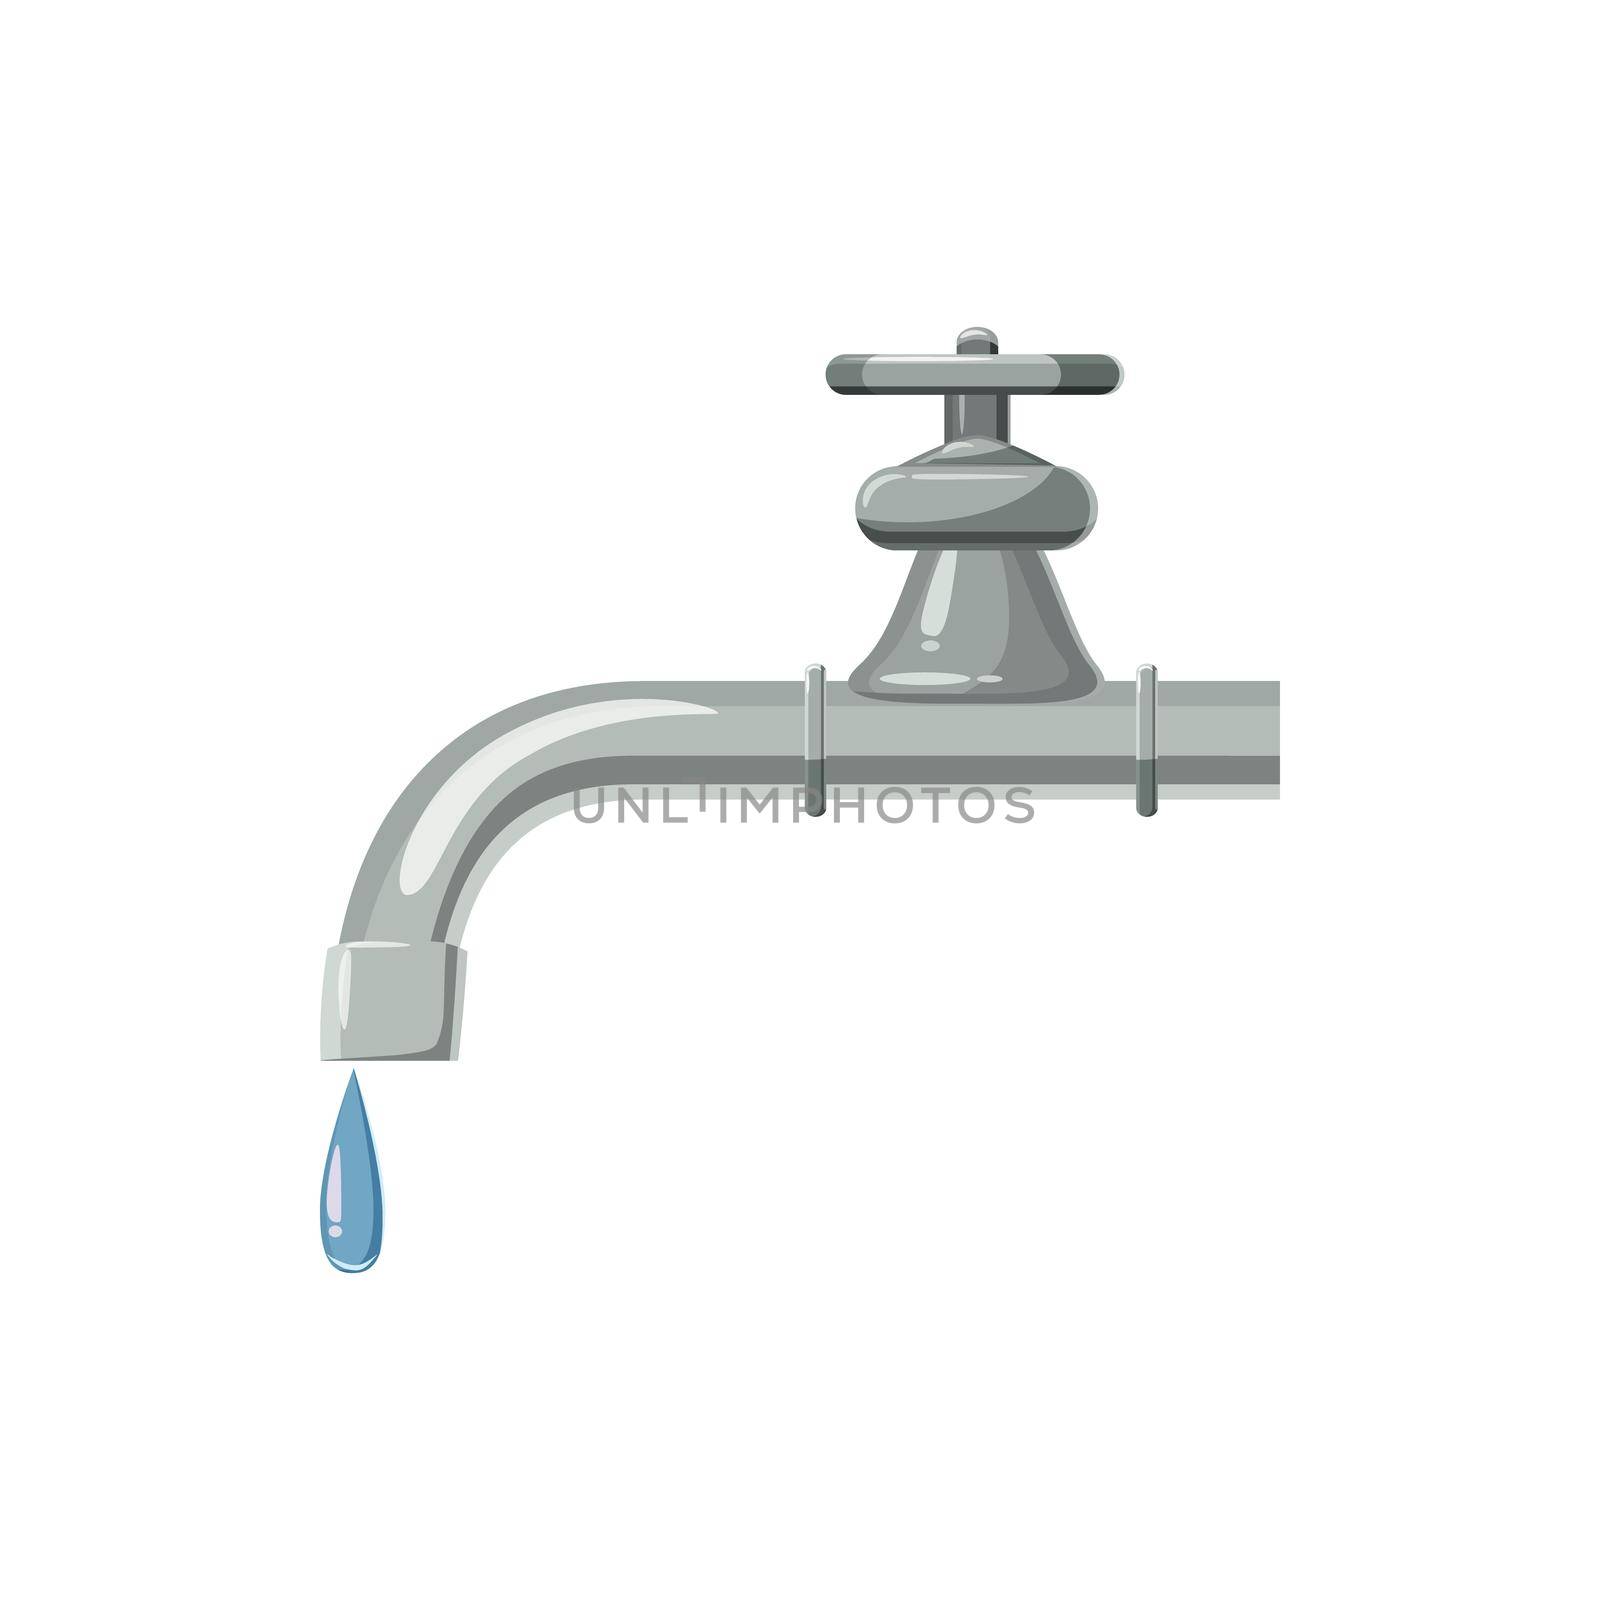 Dripping faucet icon in cartoon style on a white background